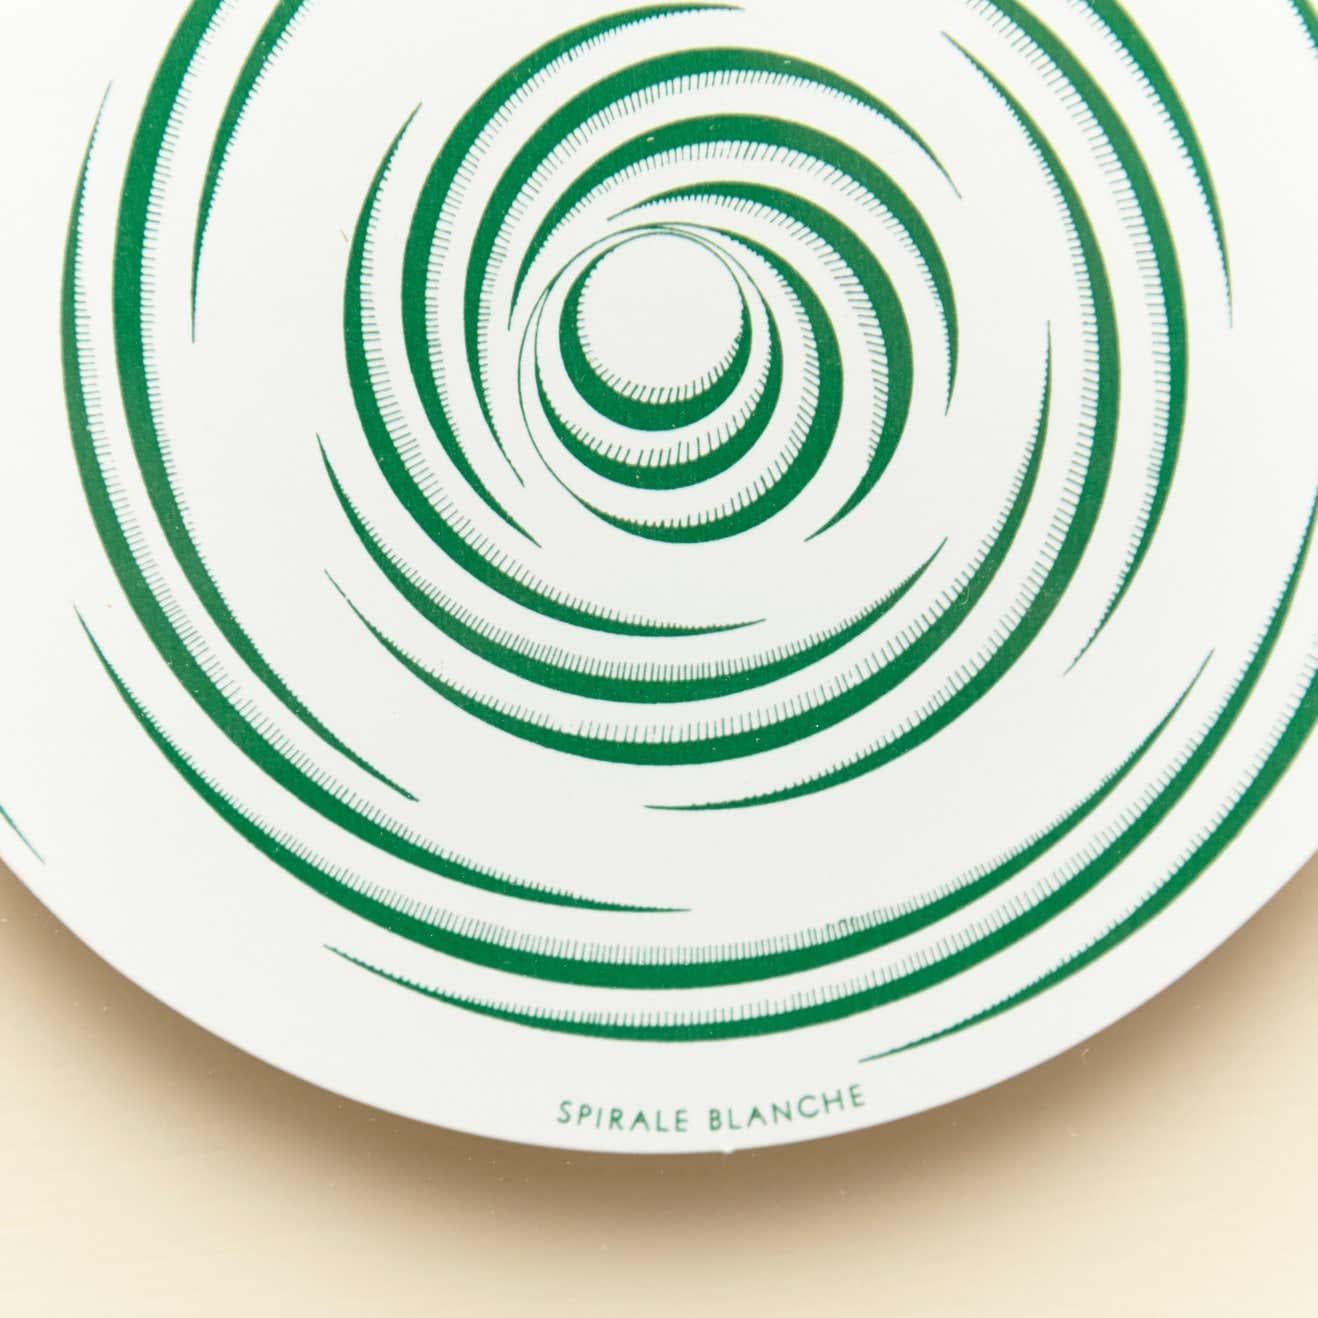 Set of 10 Marcel Duchamp Rotoreliefs, 1987 Konig Series 133.

Henri-Robert-Marcel Duchamp (French 28 July 1887–2 October 1968) was a French, naturalized American painter, sculptor, chess player and writer whose work is associated with Cubism,